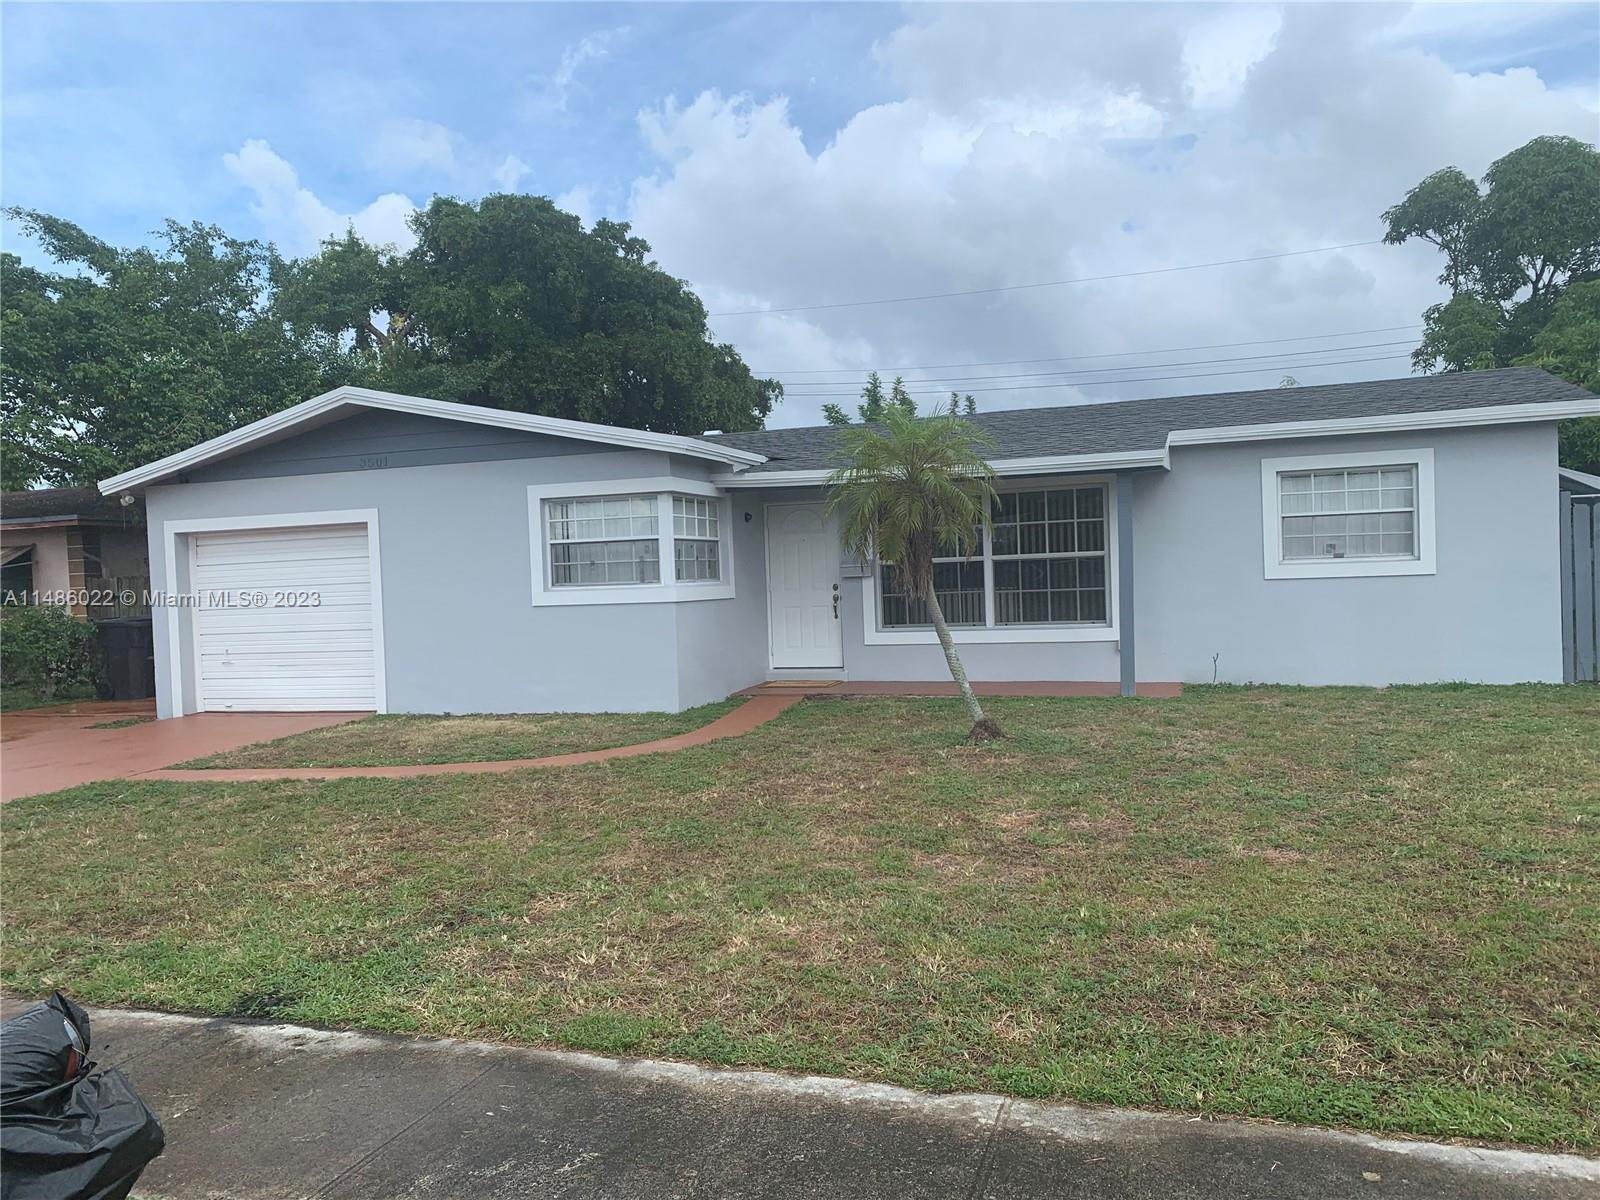 Photo of 3501 NW 25th St in Lauderdale Lakes, FL